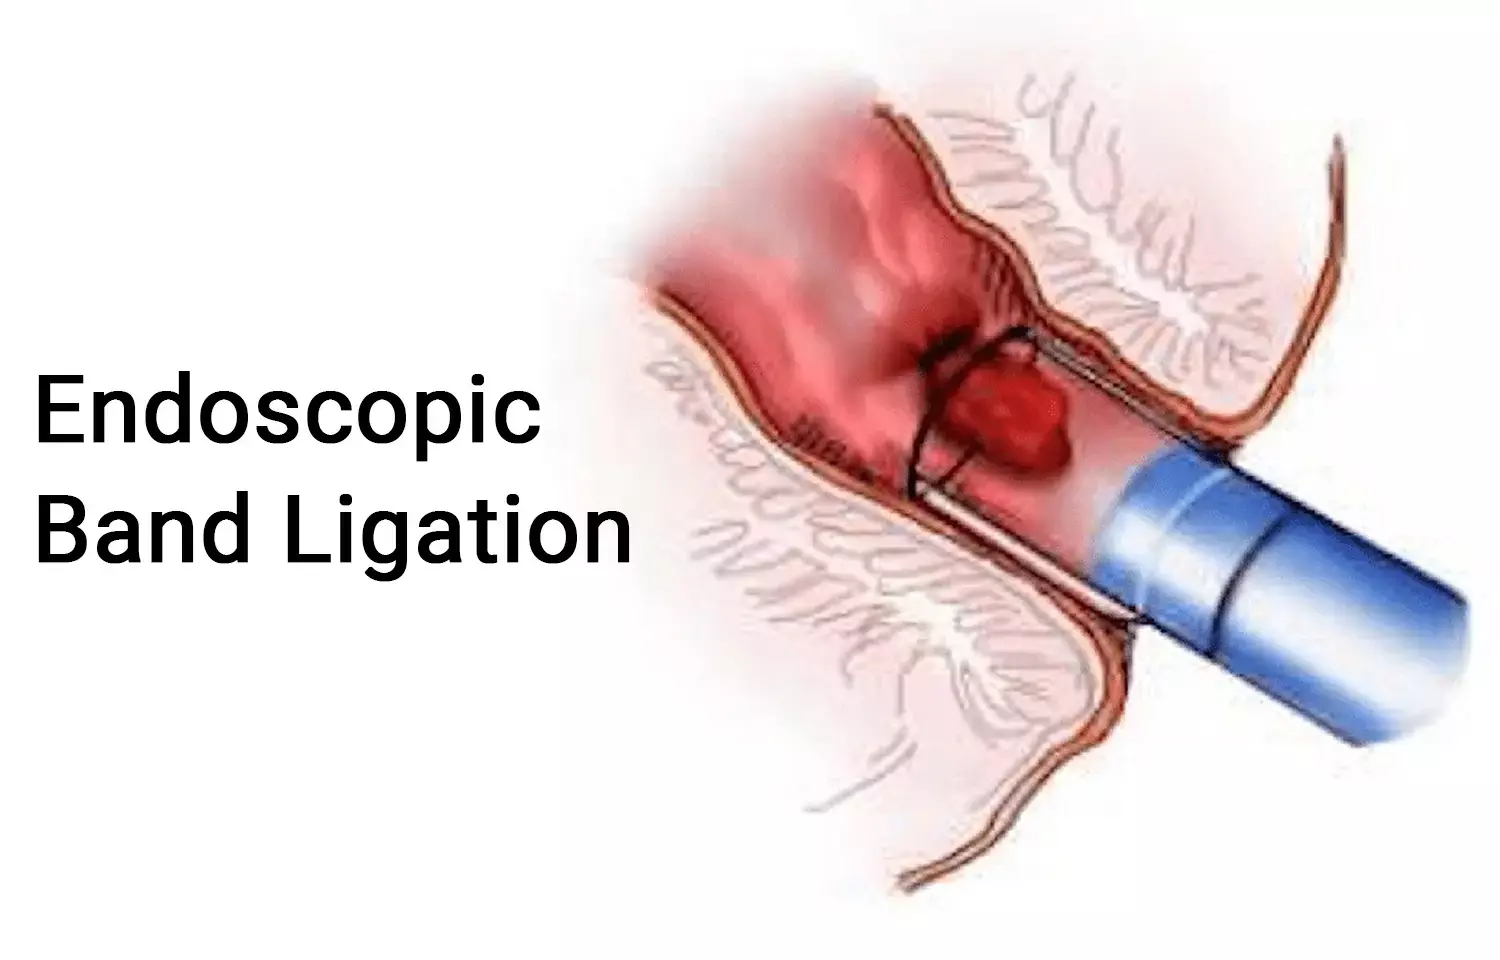 Endoscopic band ligation a better technique to treat Gastric antral vascular Ectasia: Study